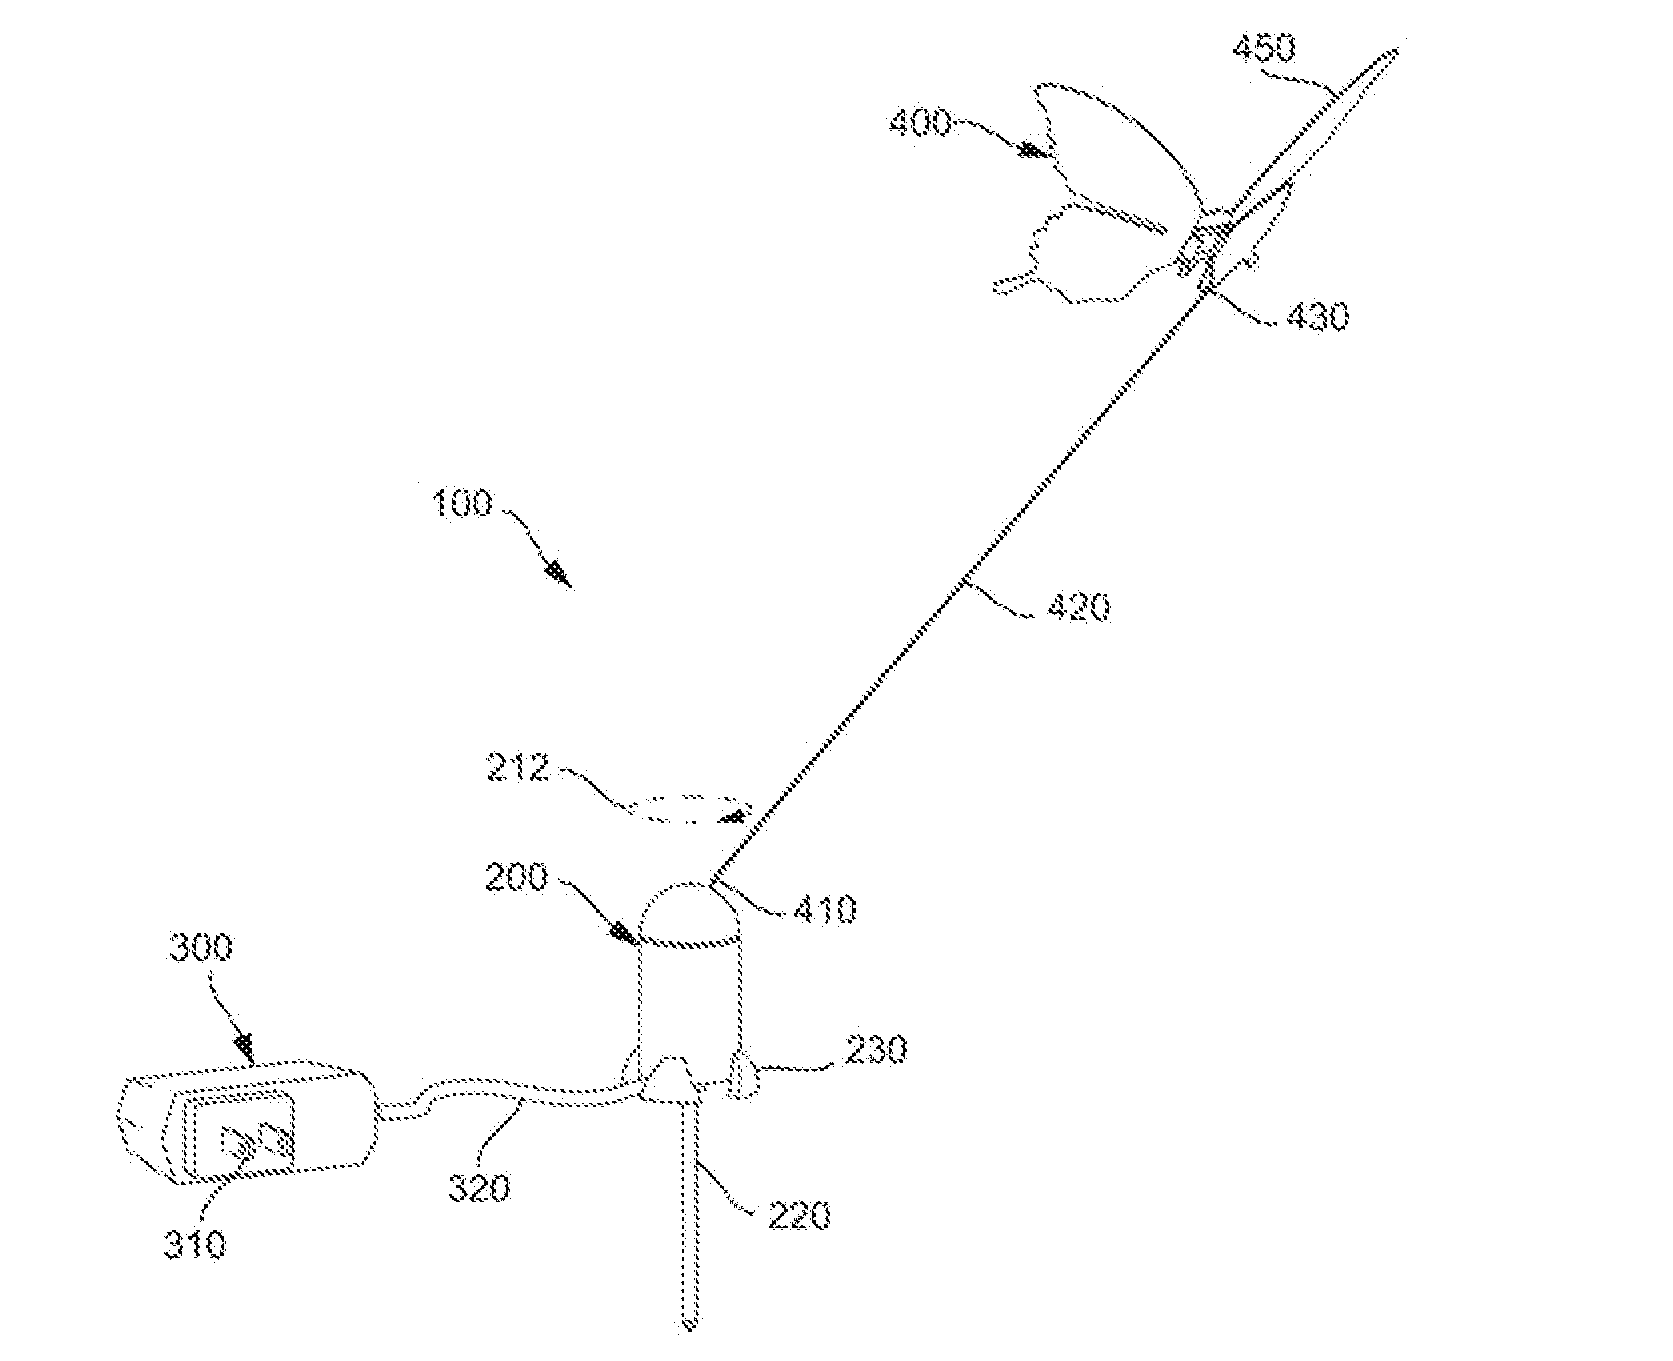 Electrically propelled display device with simulated hovering and/or flying patterns